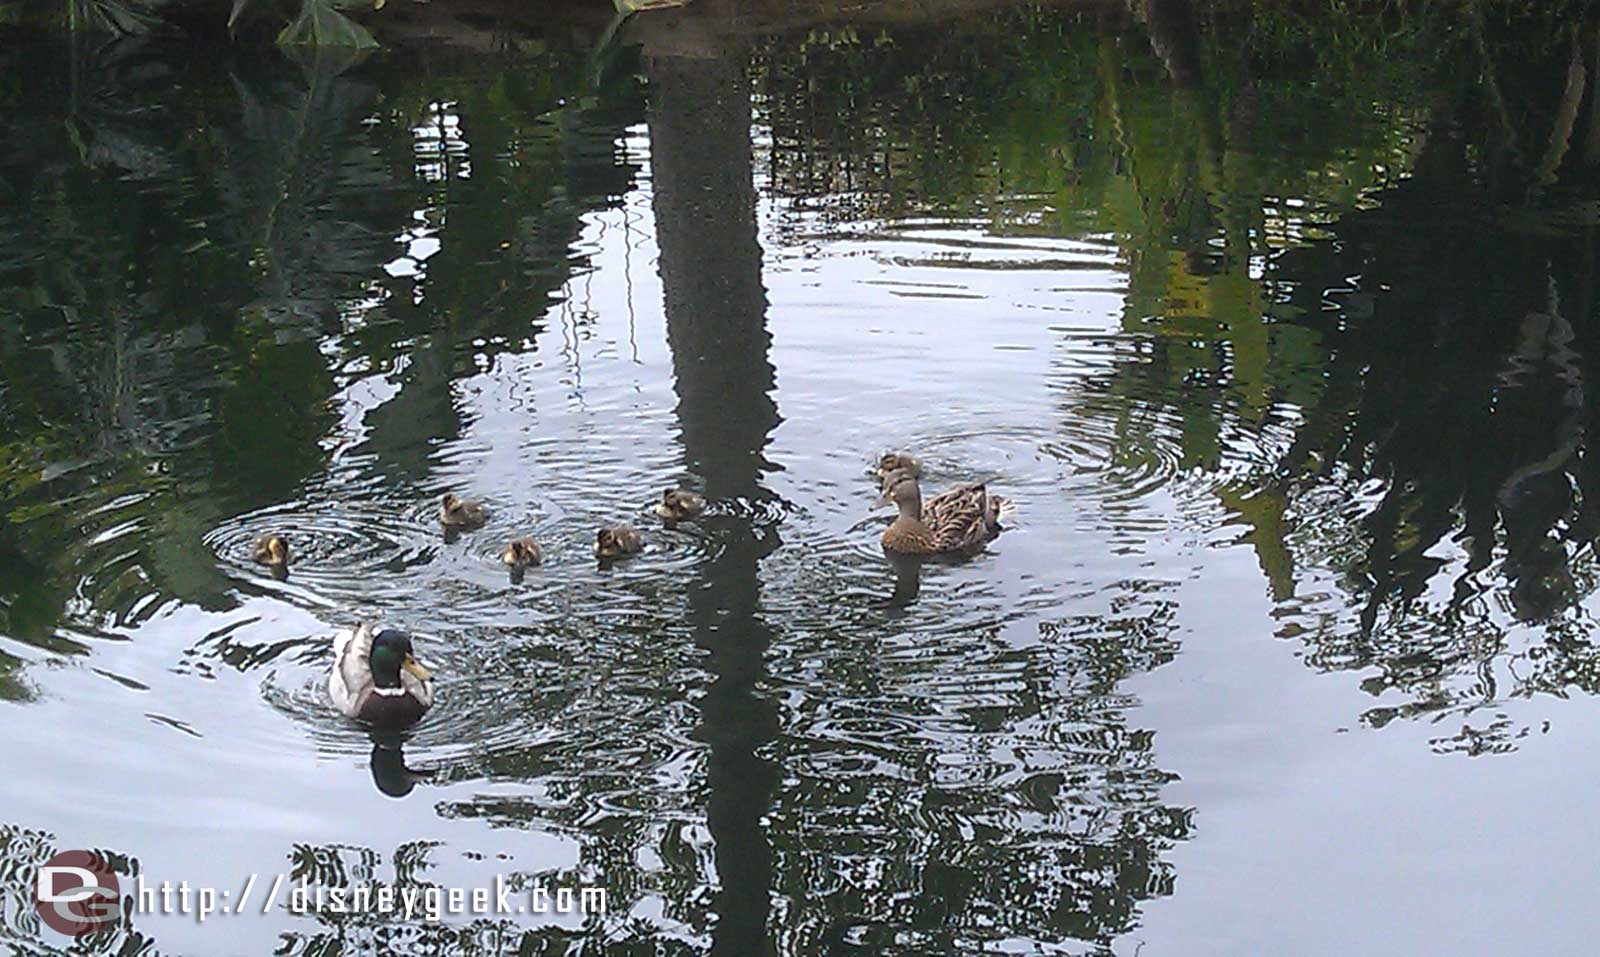 For all you Disney Duck fans.. a family out for a morning swim